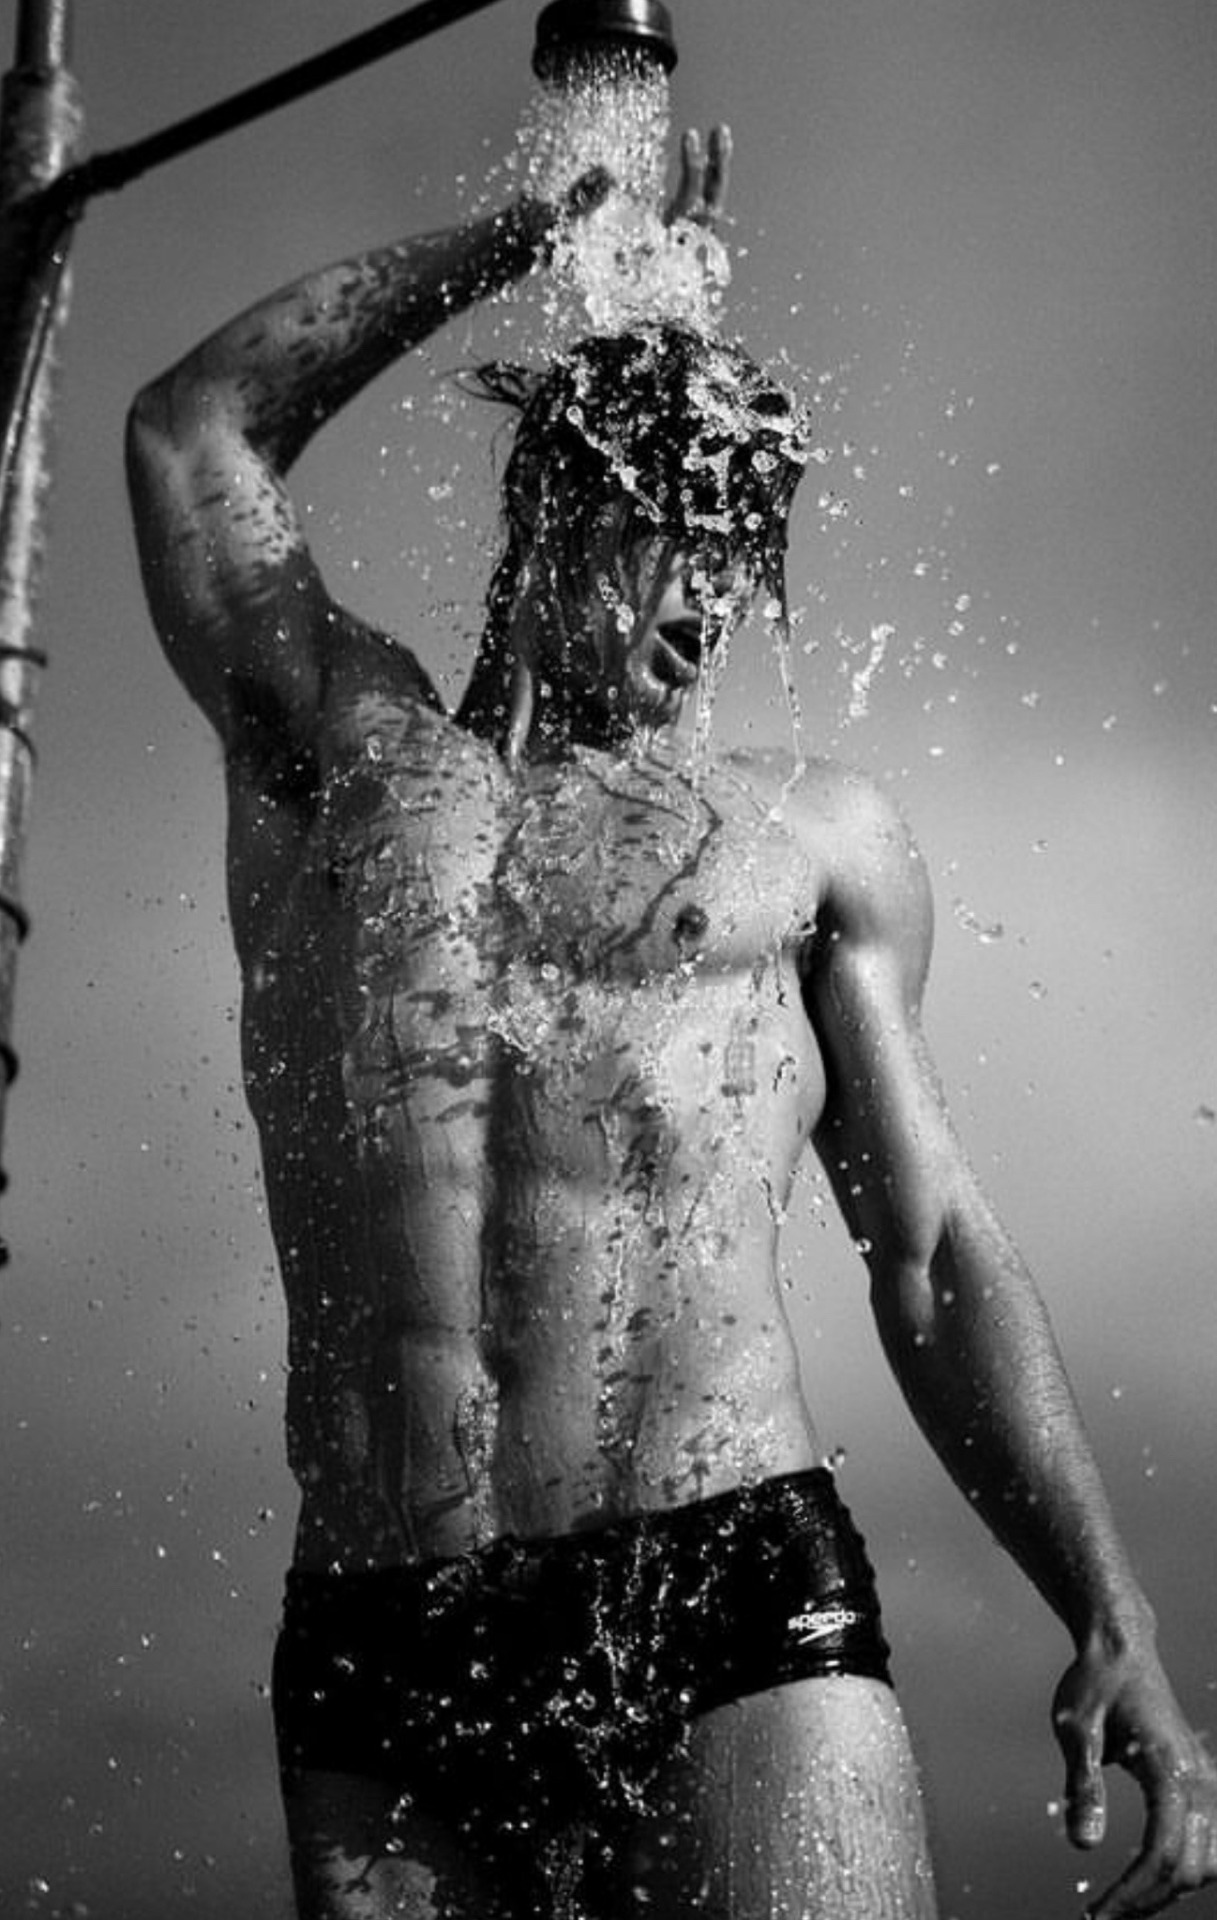 Taking Off:
The Shower Series, #523.
Click, reblog and follow. Pass me around to all your friends.